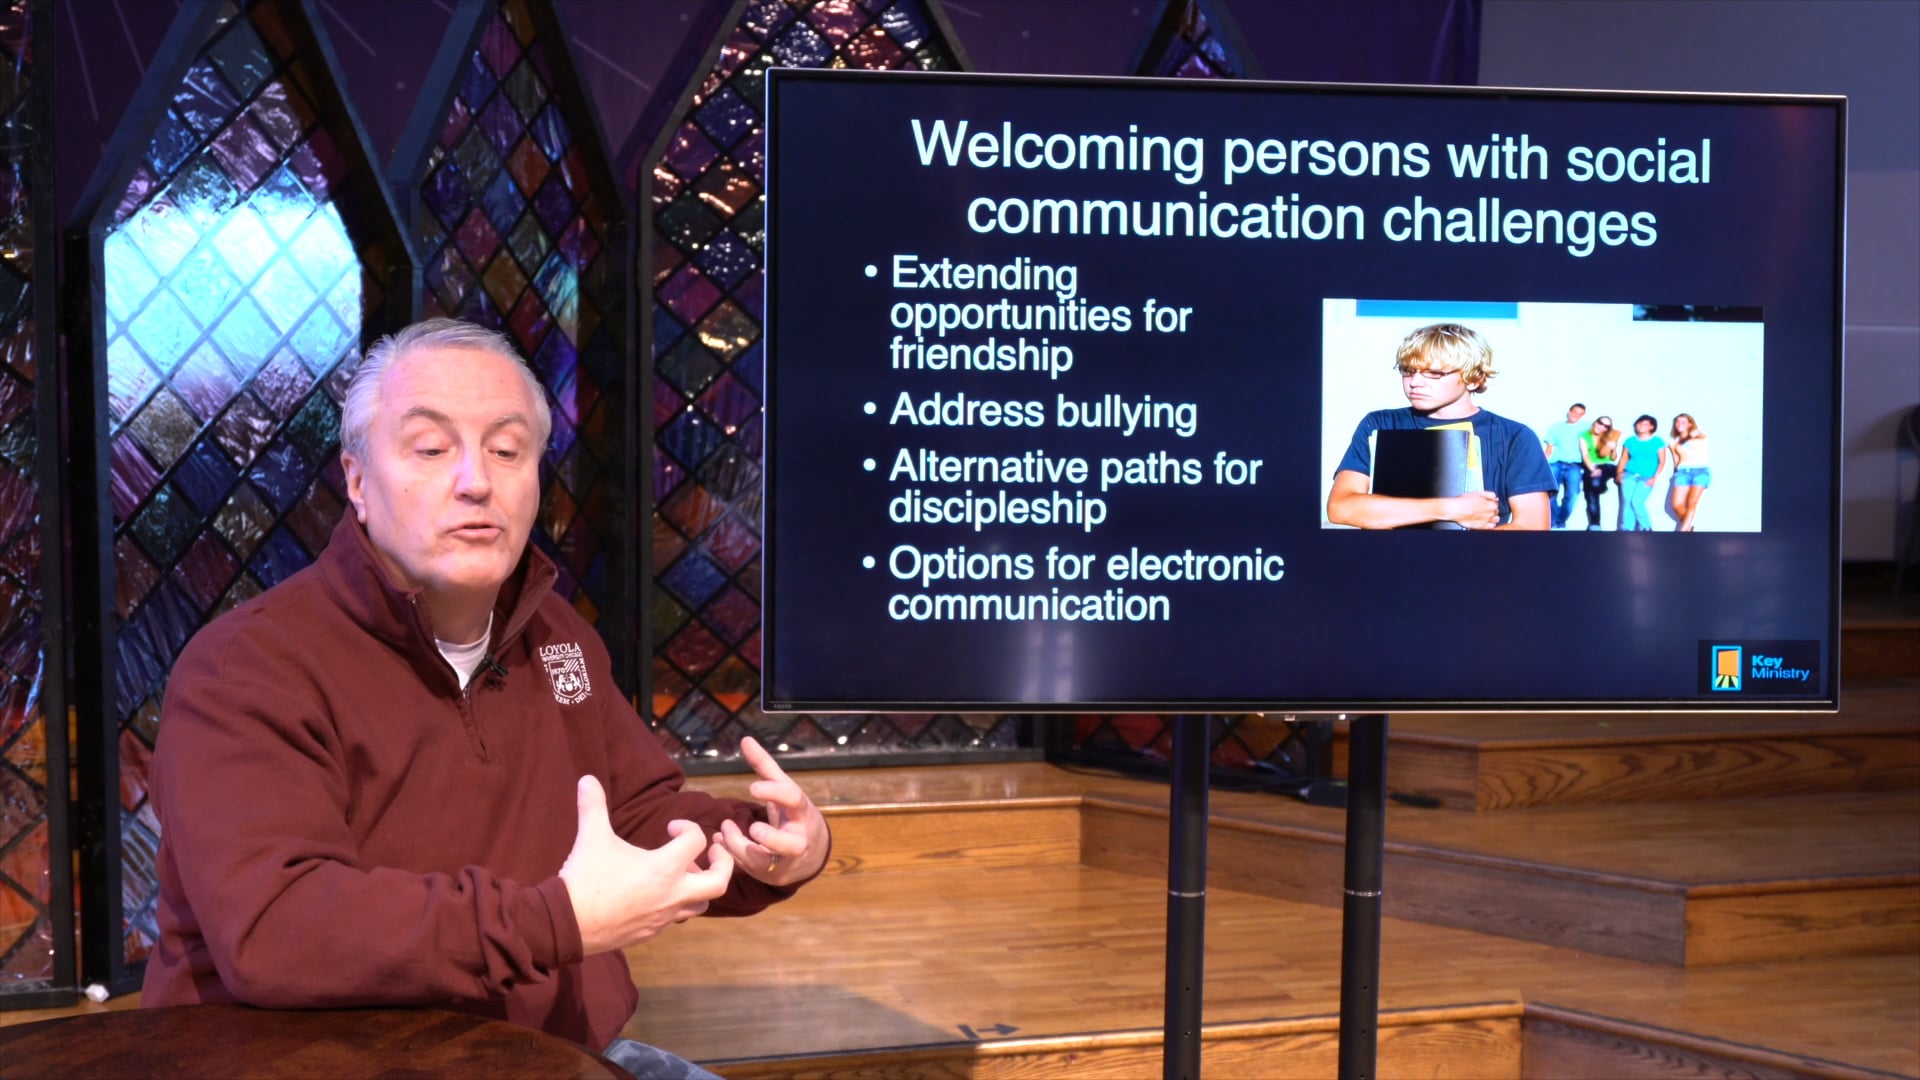 man teaches on disability and communication challenges in church